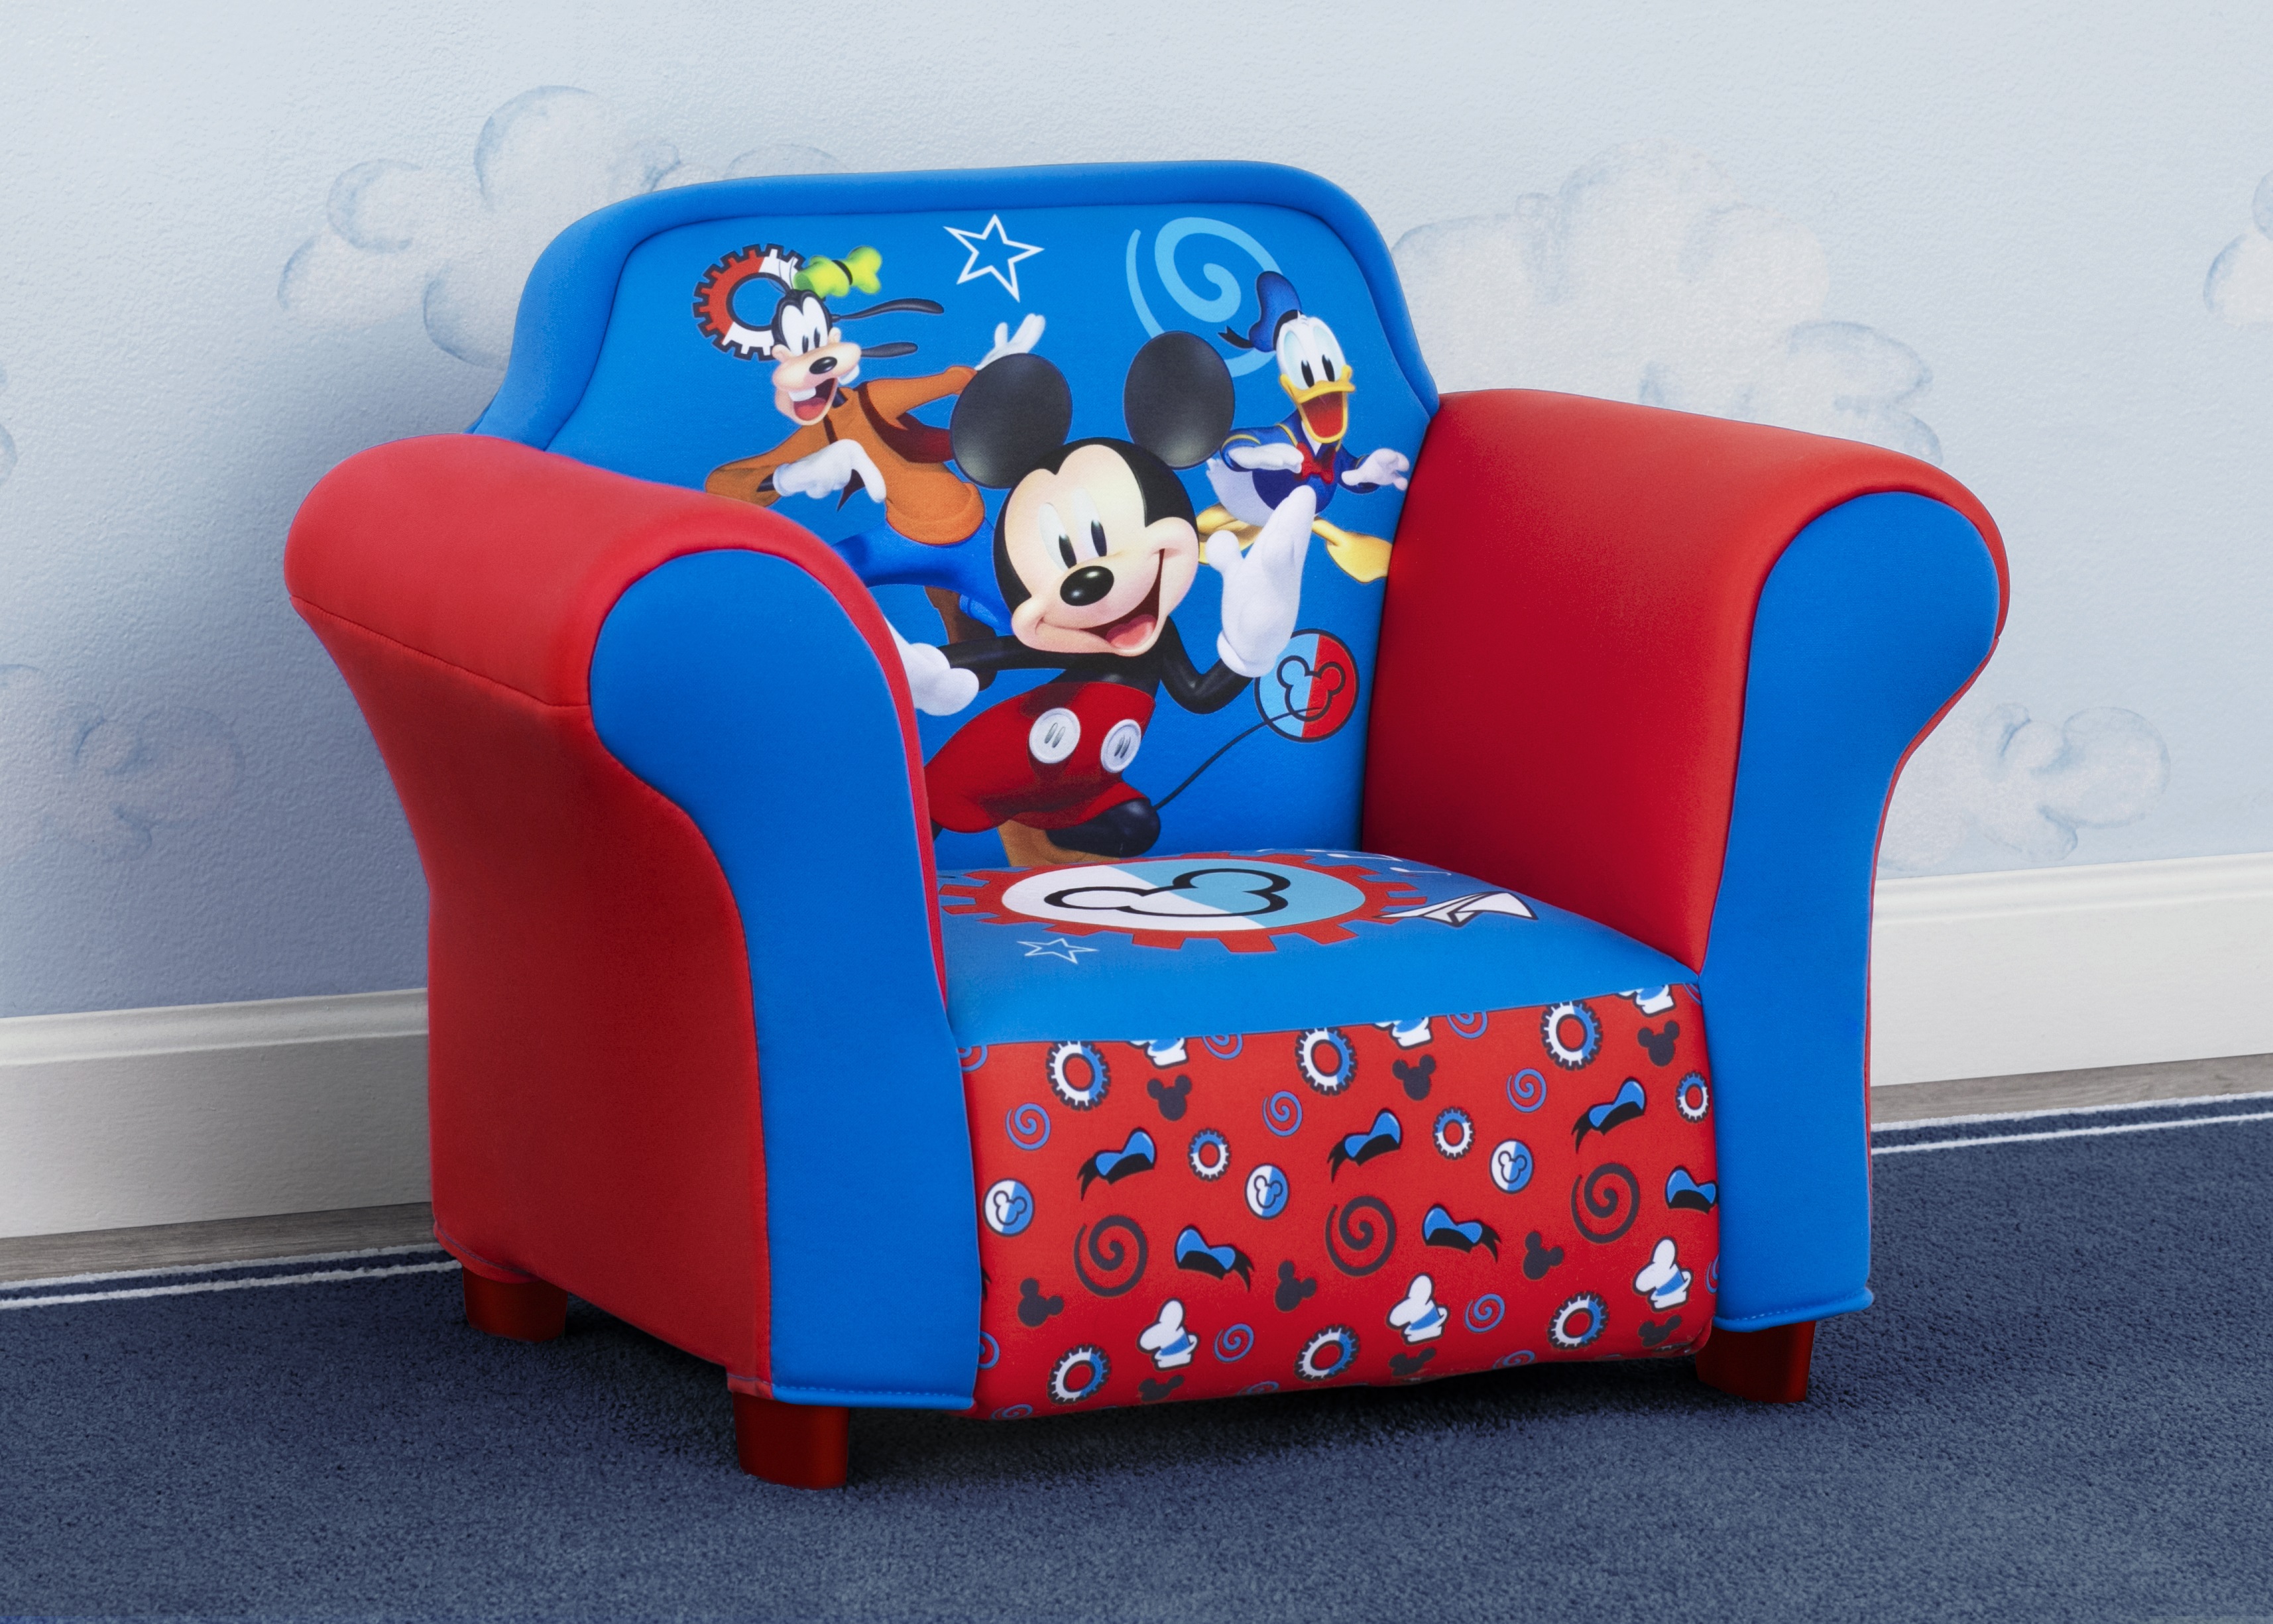 Disney Mickey Mouse Kids Upholstered Chair with Sculpted Plastic Frame by Delta Children - image 3 of 6